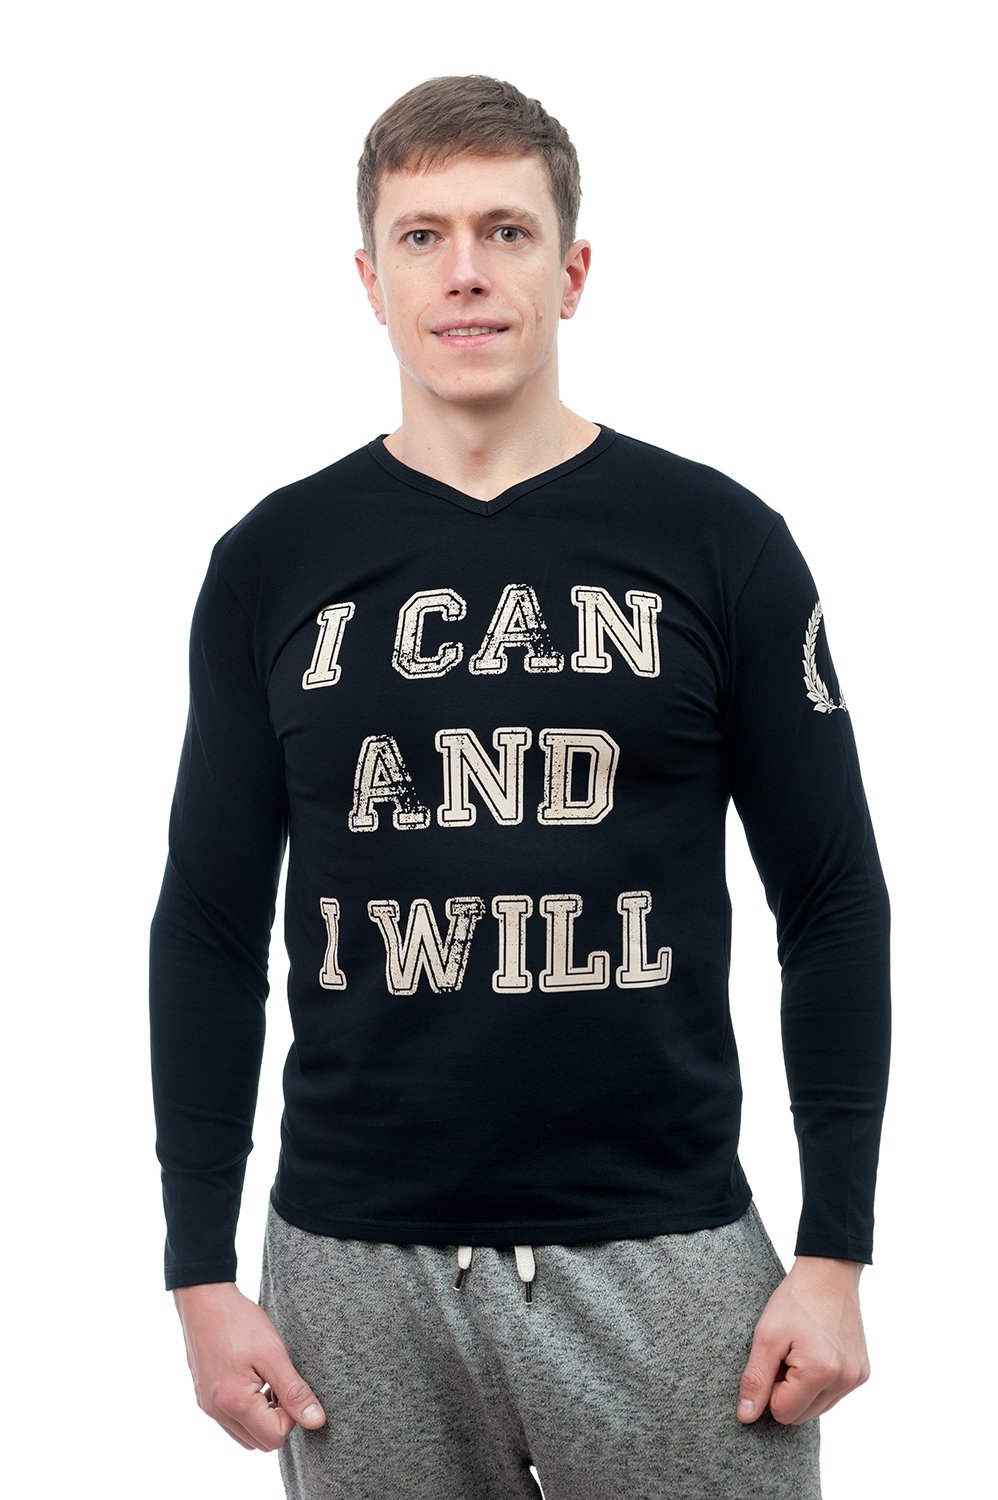 Longsleeve unisex   I can and i will, black, size M